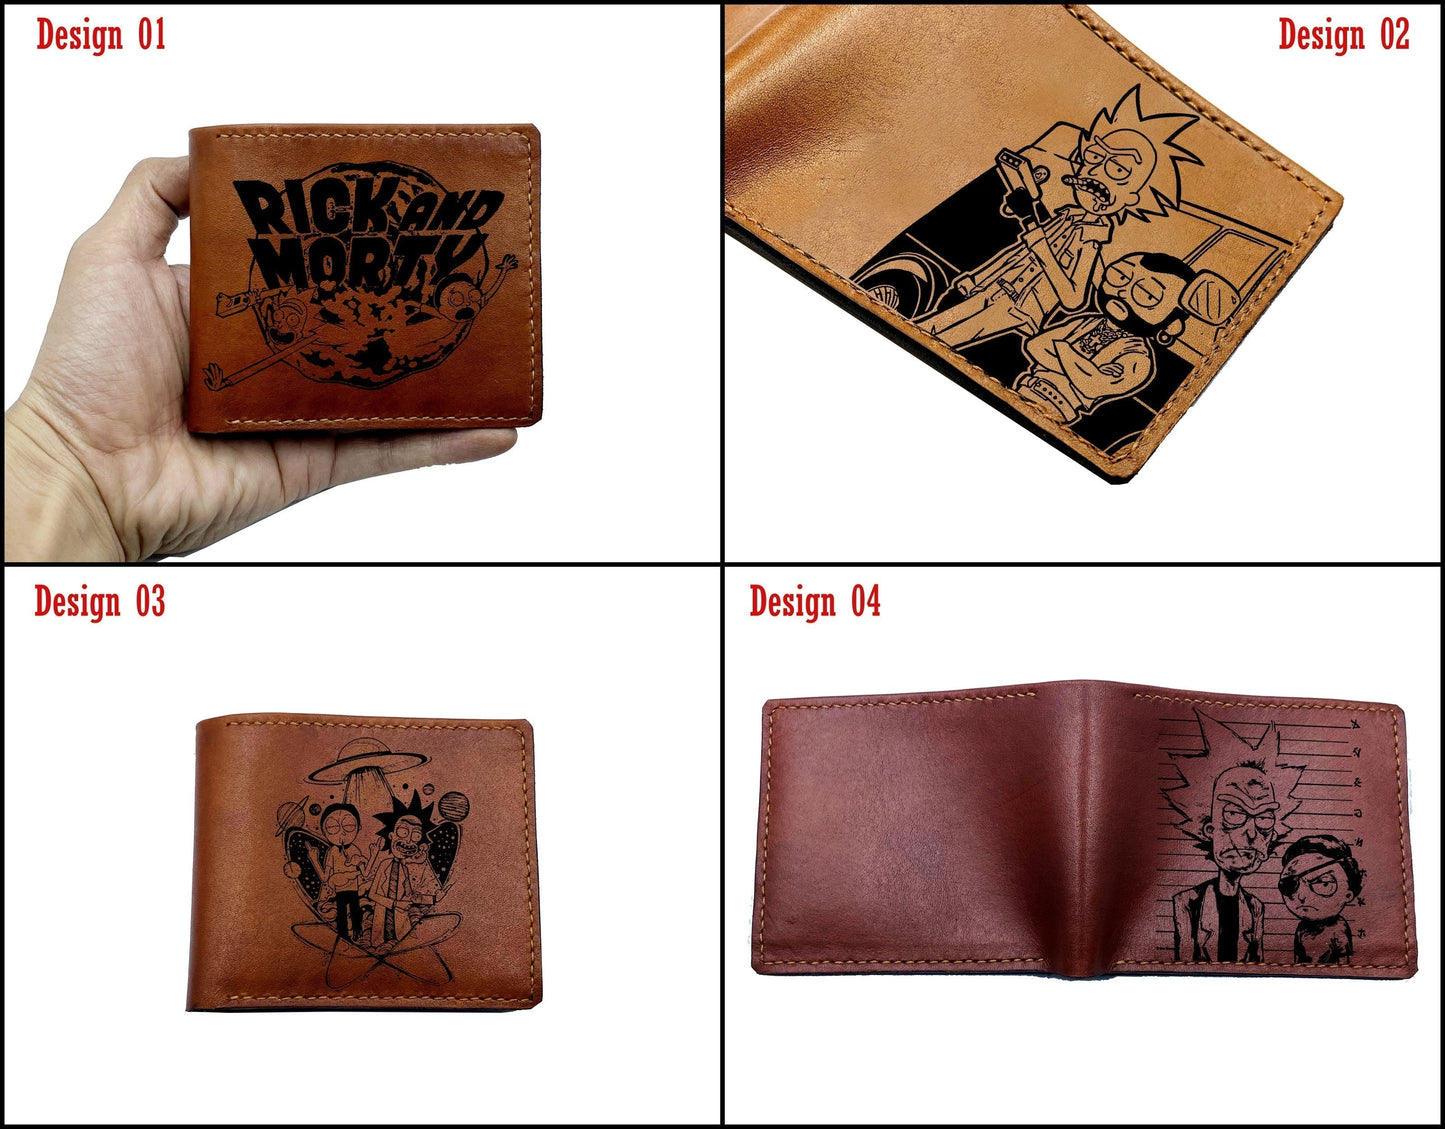 Mayan Corner - Rick and Morty movie series characters leather men's wallet, cartoon art wallet, cool leather gift for him - RM280108